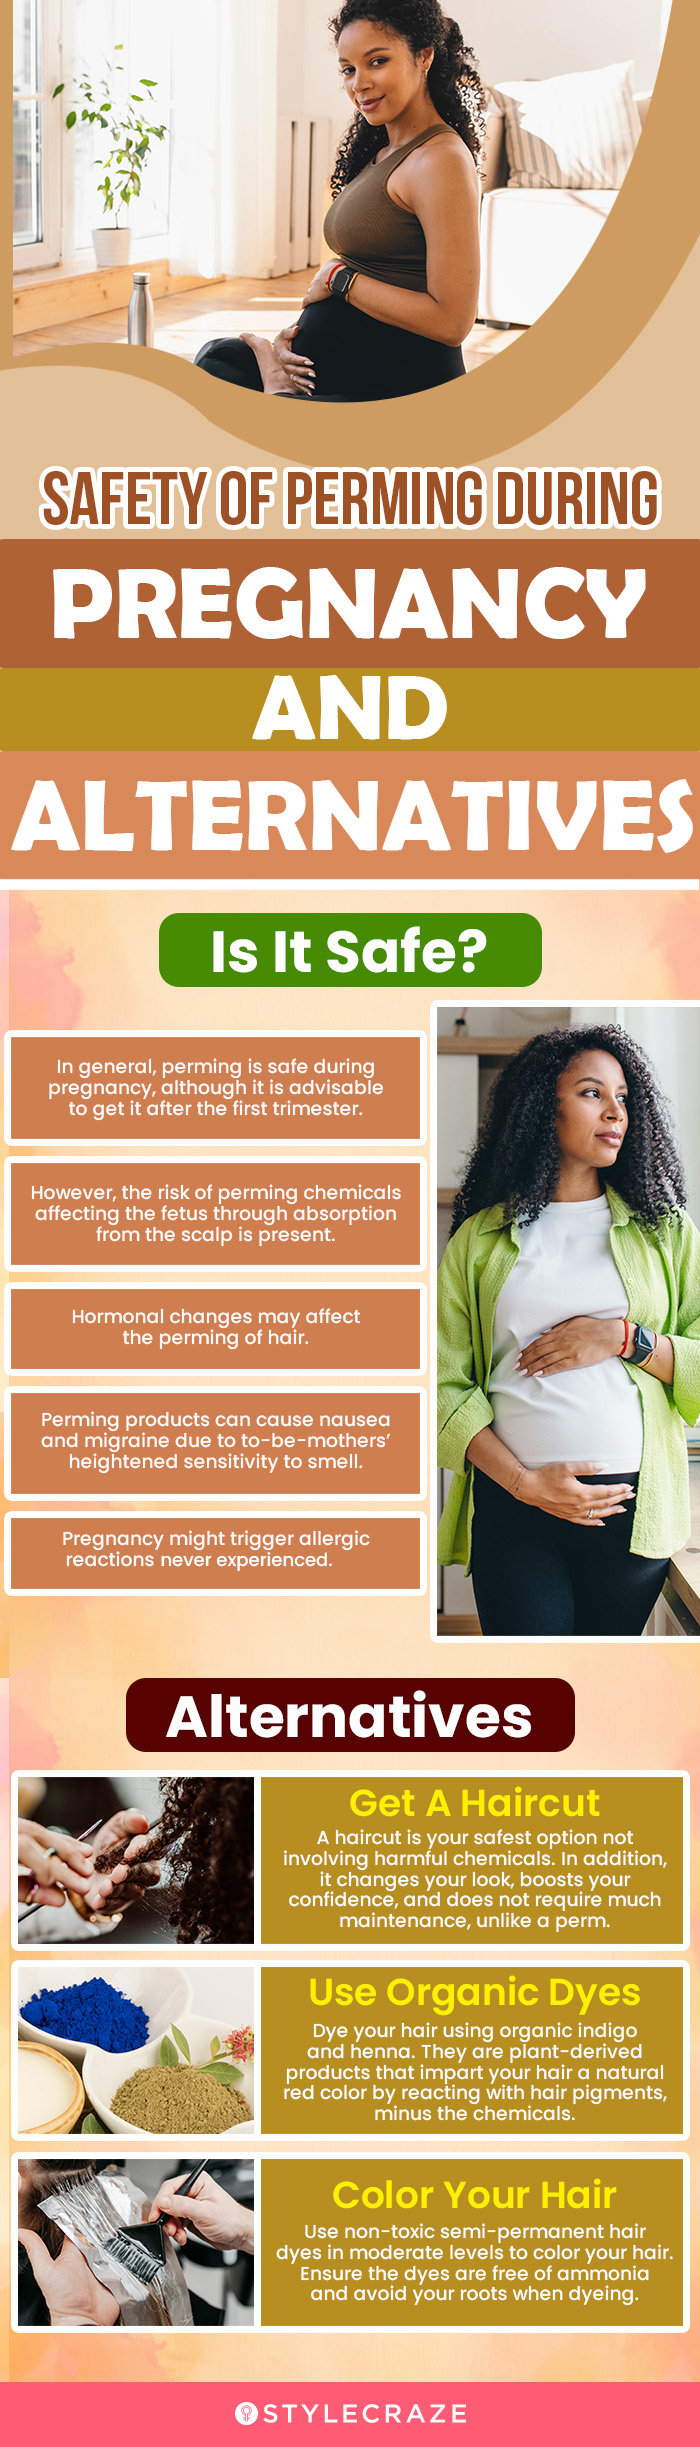 safety of perming during pregnancy and alternatives (infographic)